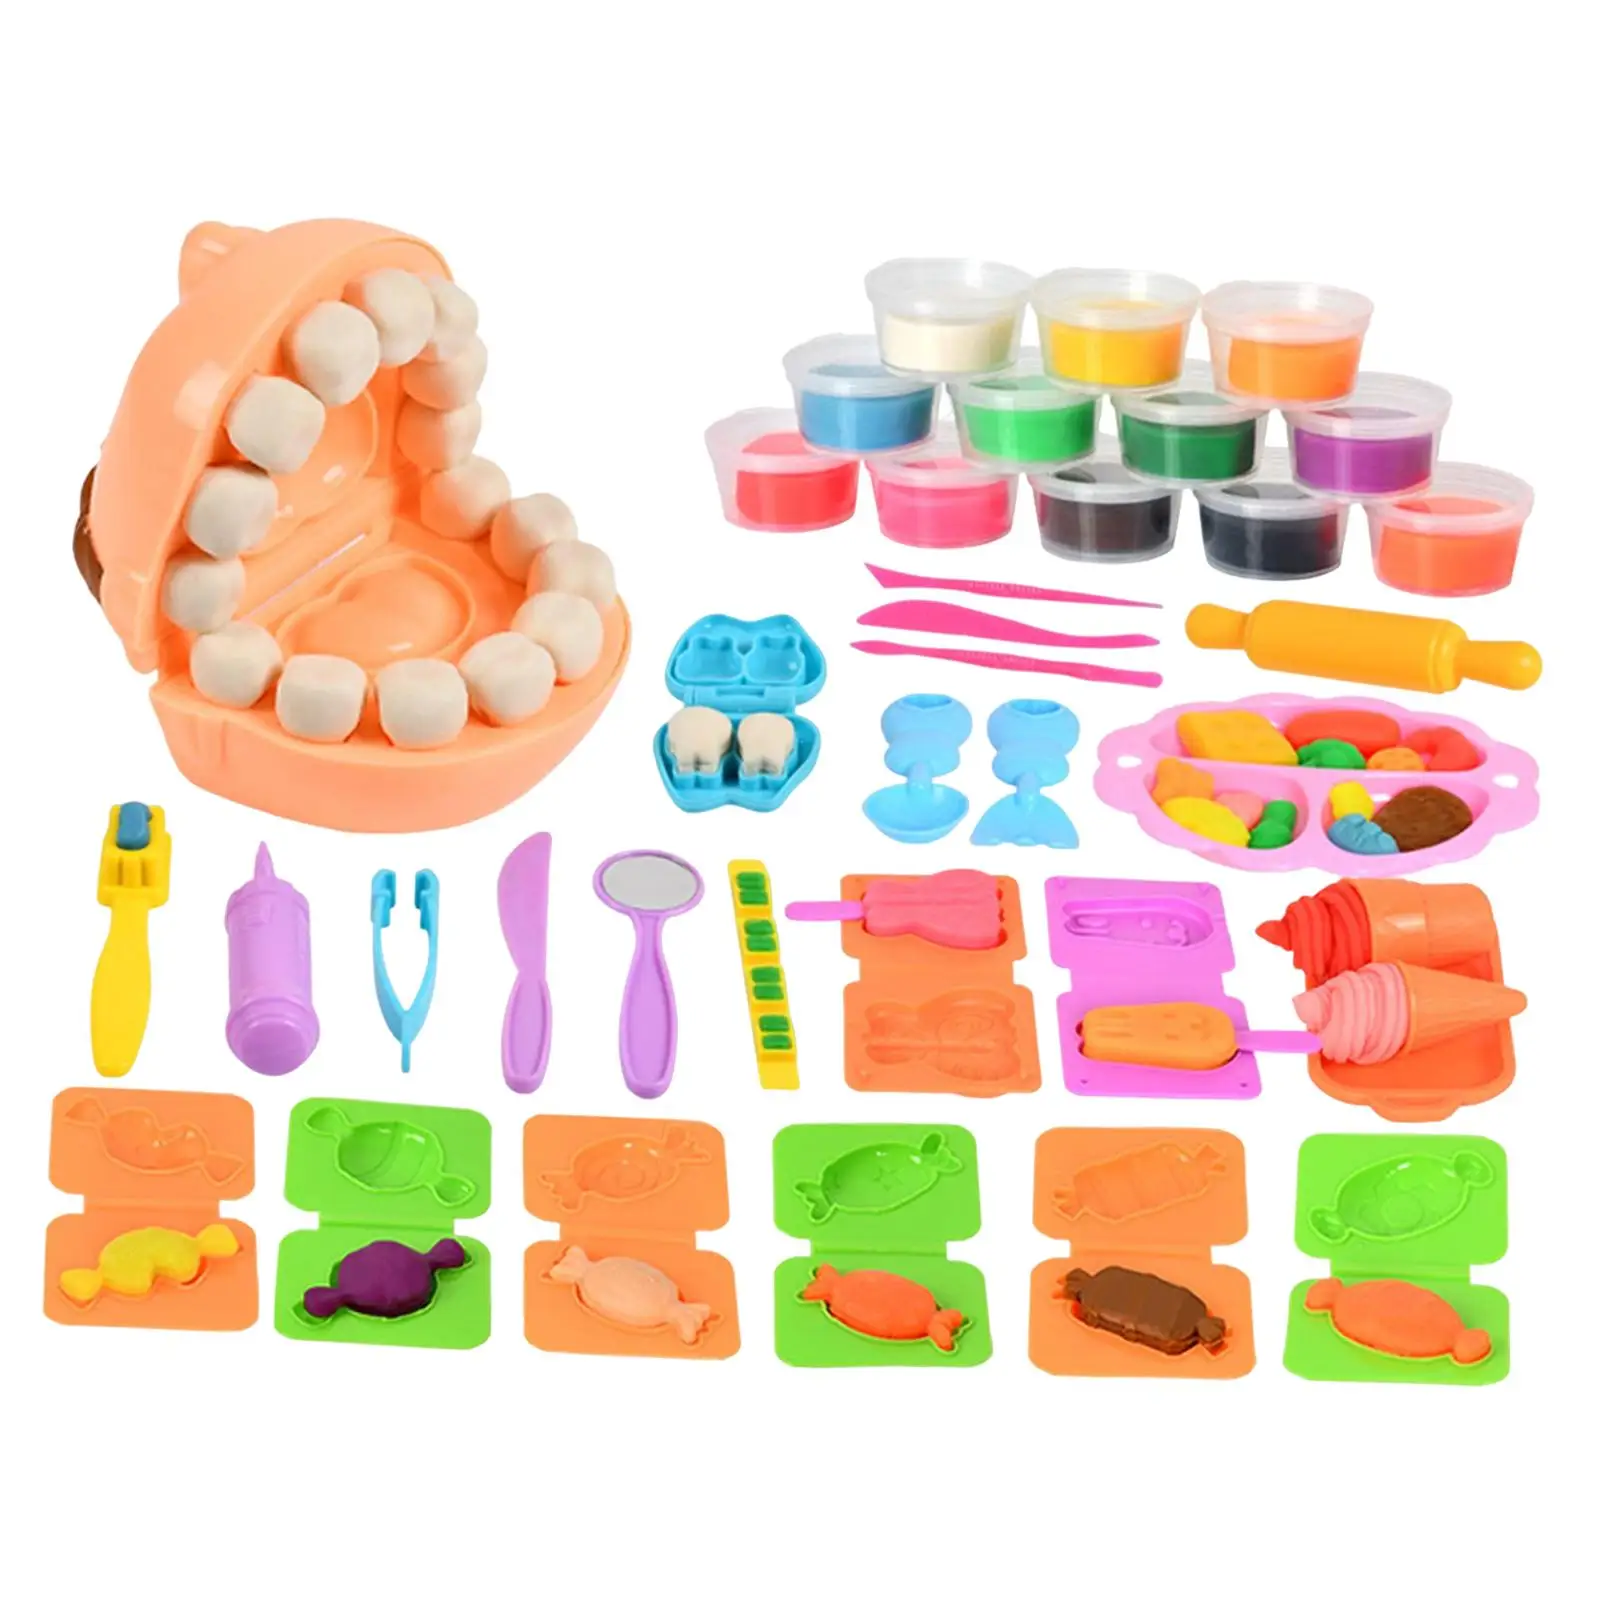 Clay Set Pretend Play DIY Models Educational 12 Colors with Accessoires Art Crafts for Toddlers Birthday Gift Children Kids